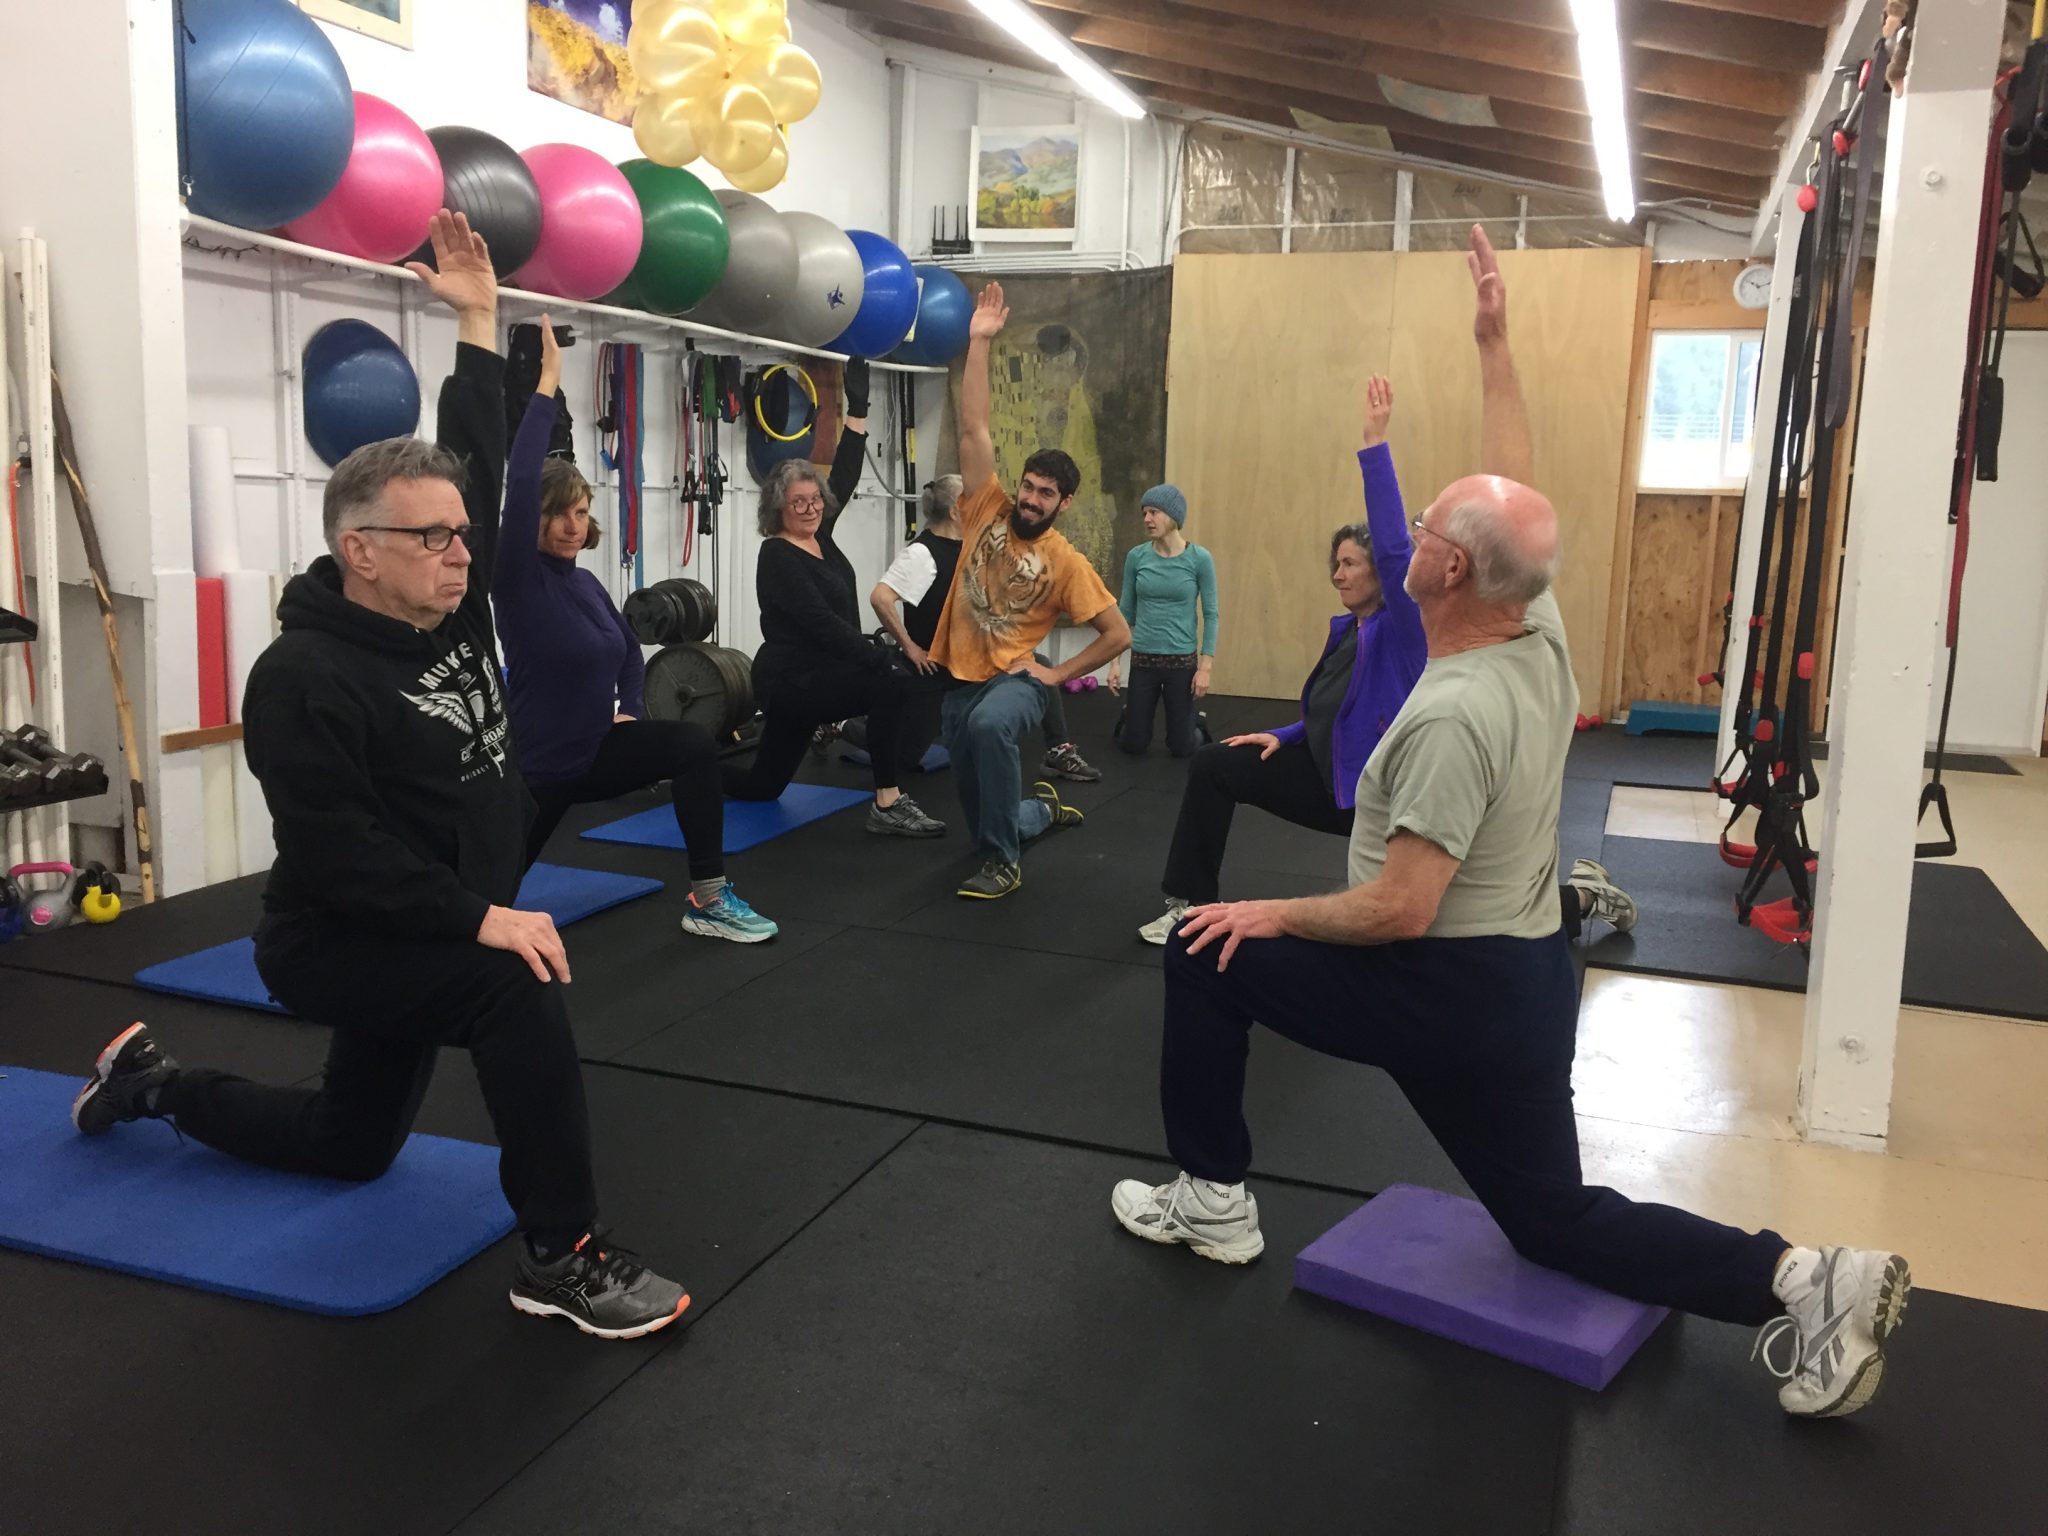 A group photo showing 9 total people doing functional fitness exercises, including Adam Fawcett and adult clients of various ages inside Vibrant Fitness studio together for a photo op. Everyone is smiling happy